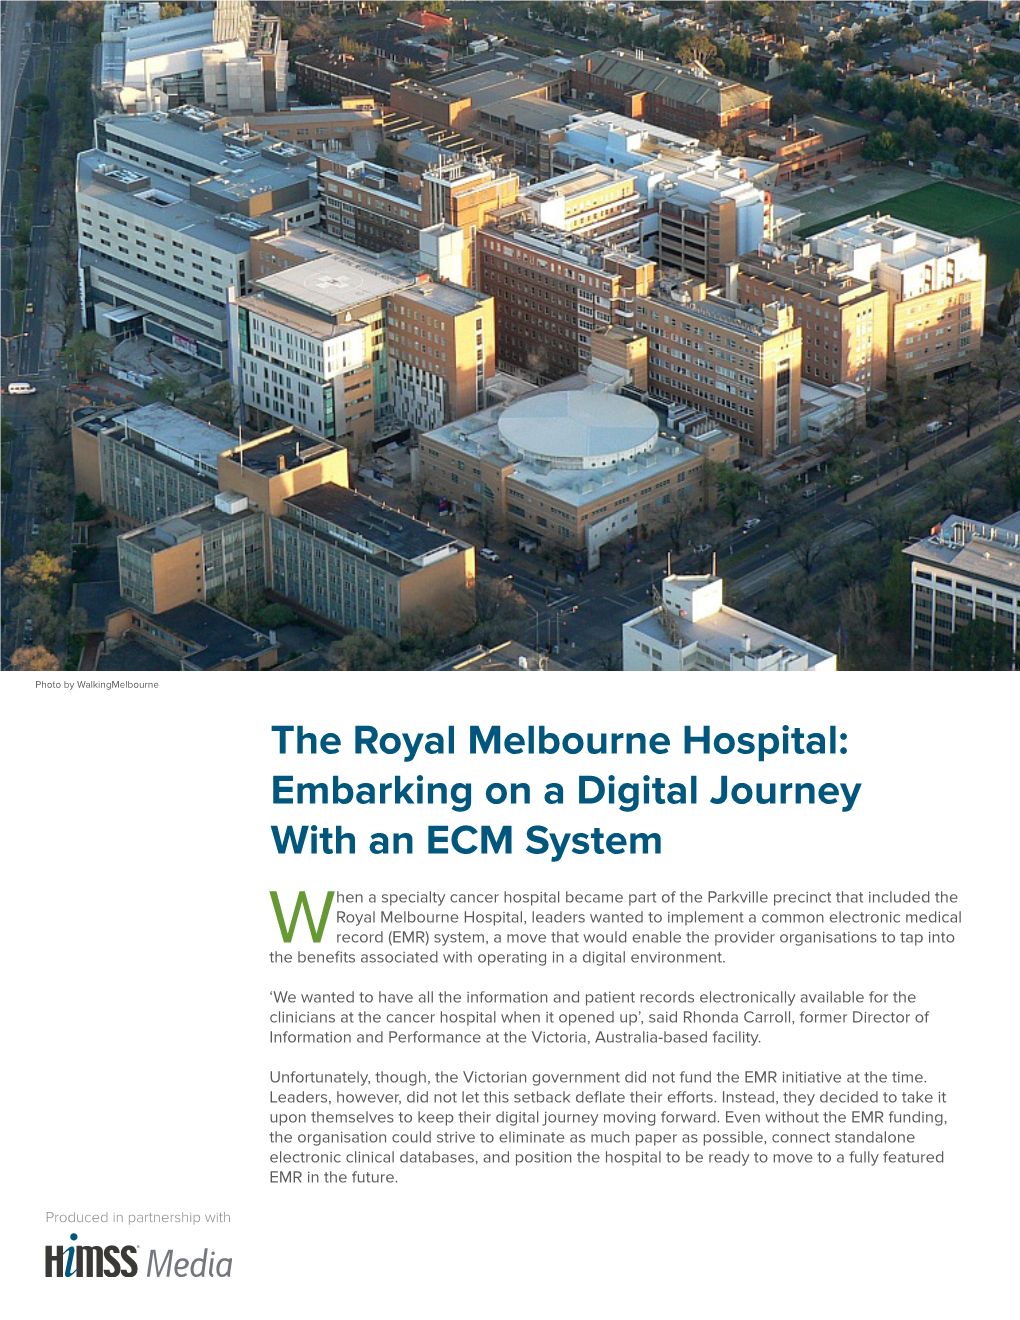 The Royal Melbourne Hospital: Embarking on a Digital Journey with an ECM System